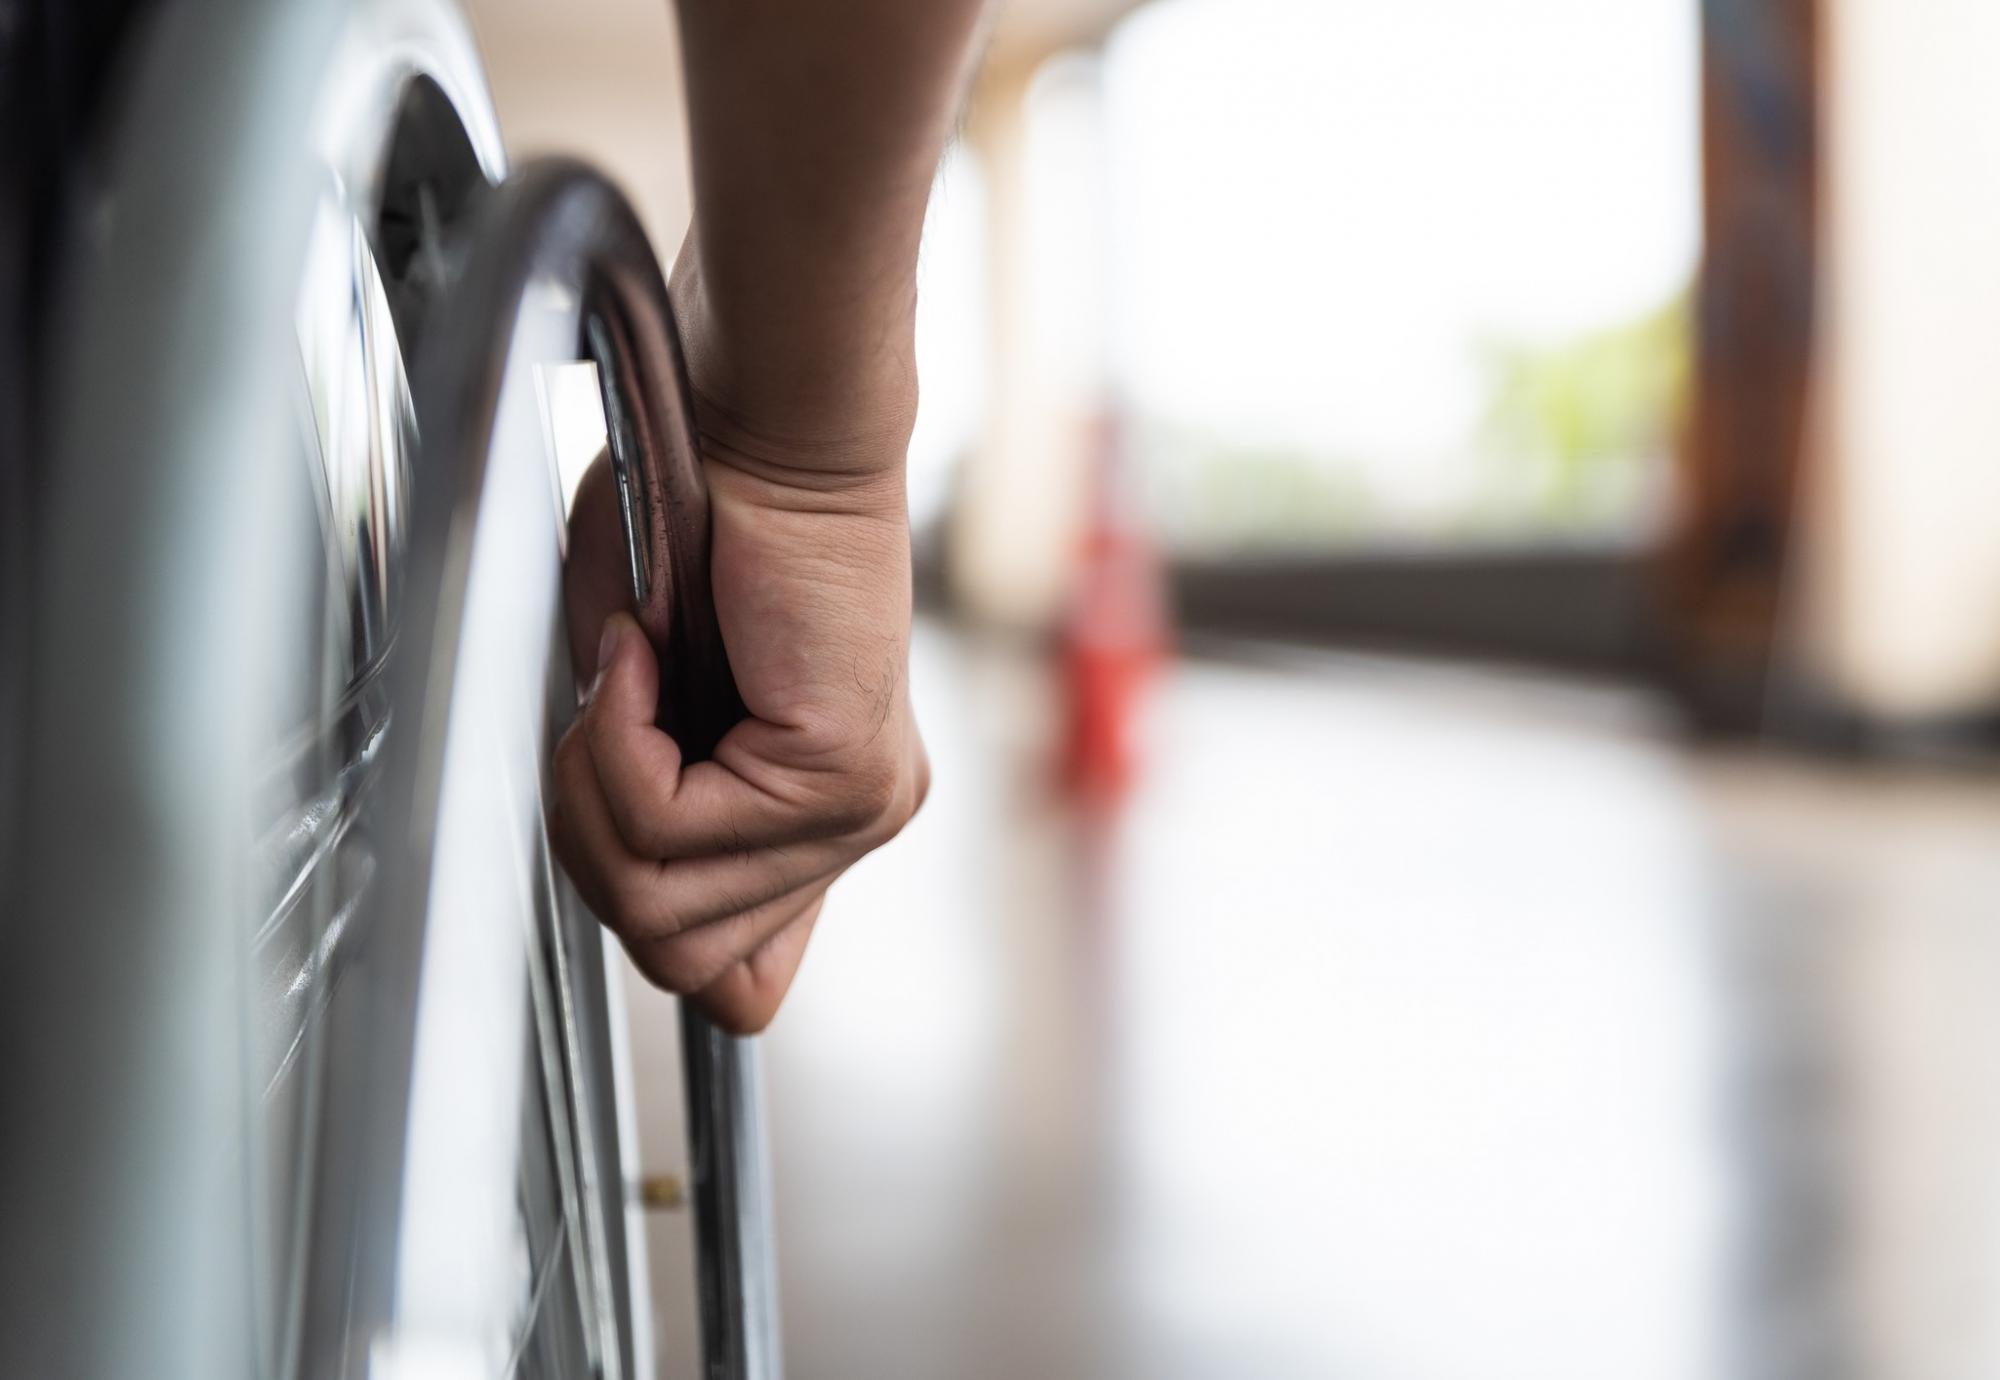 Wheelchair user on an out-of-focus platform